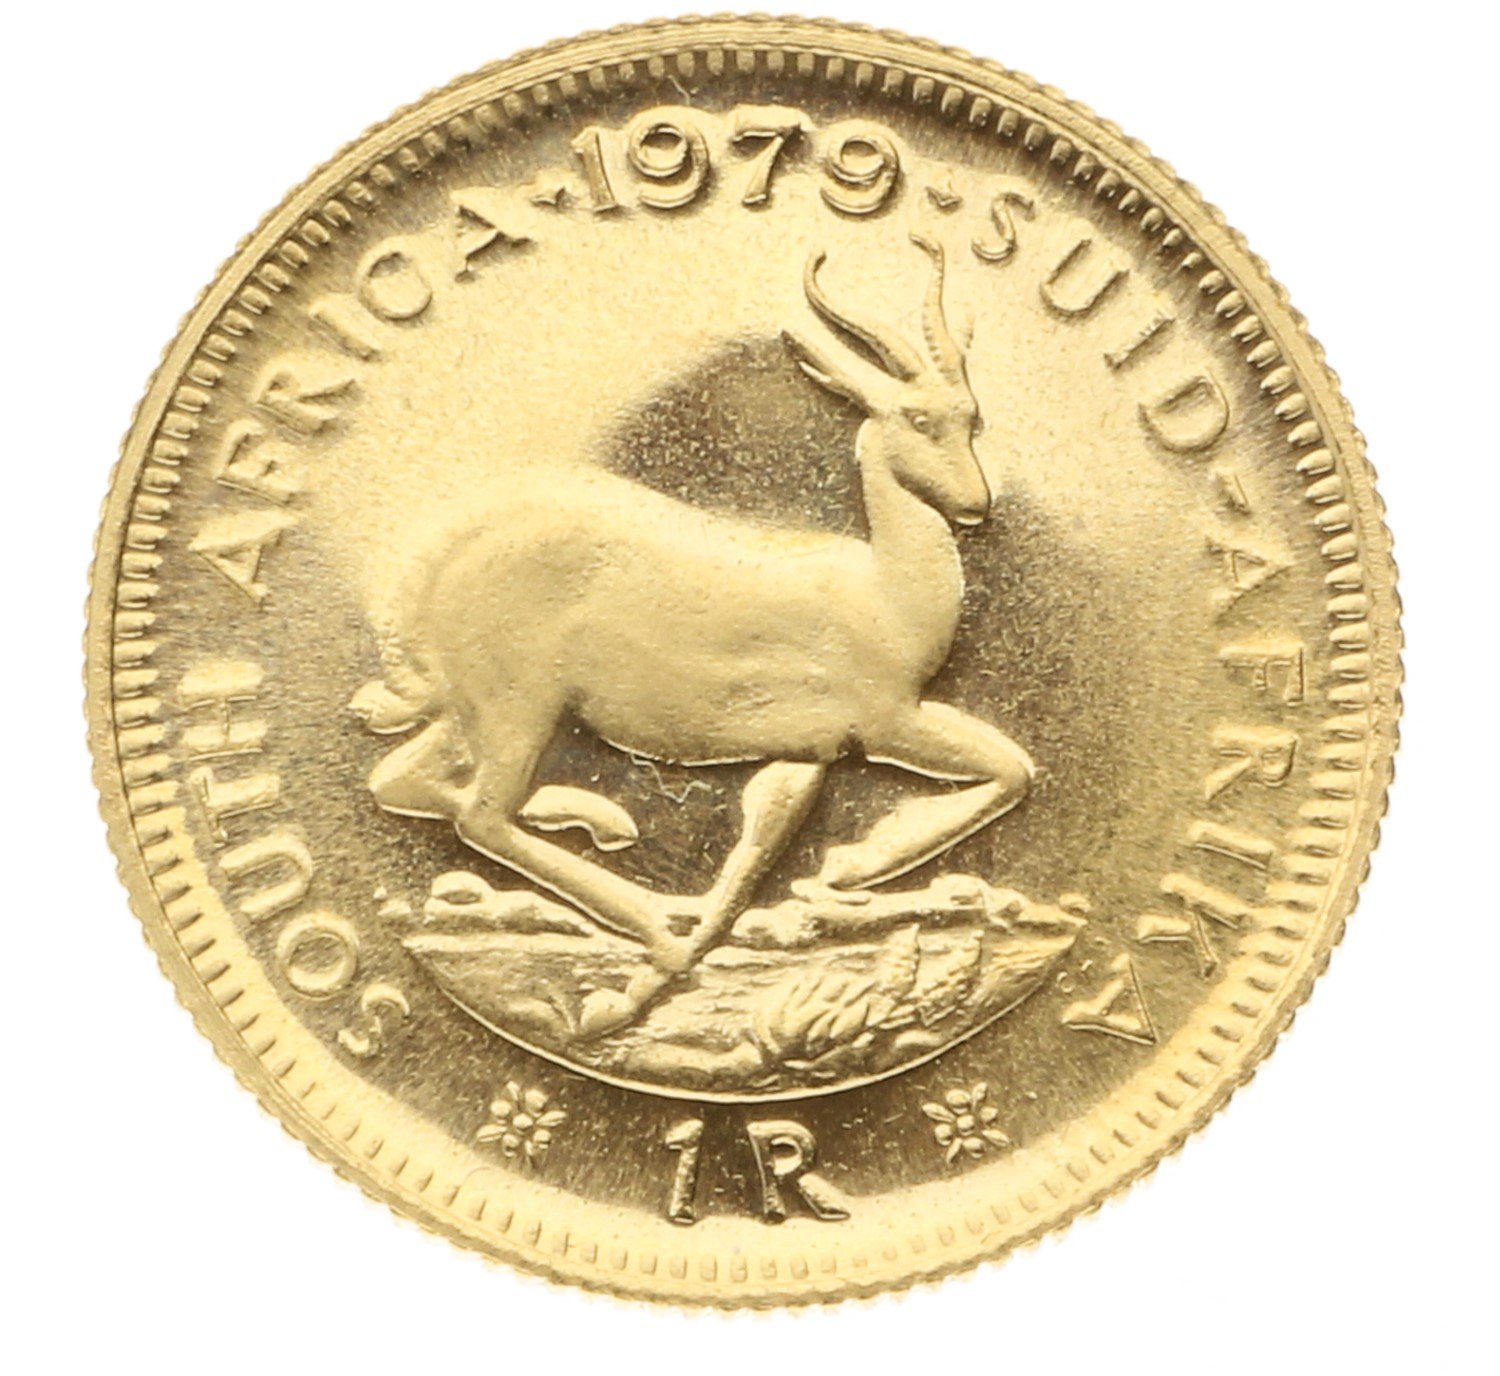 1 Rand - South Africa - 1979